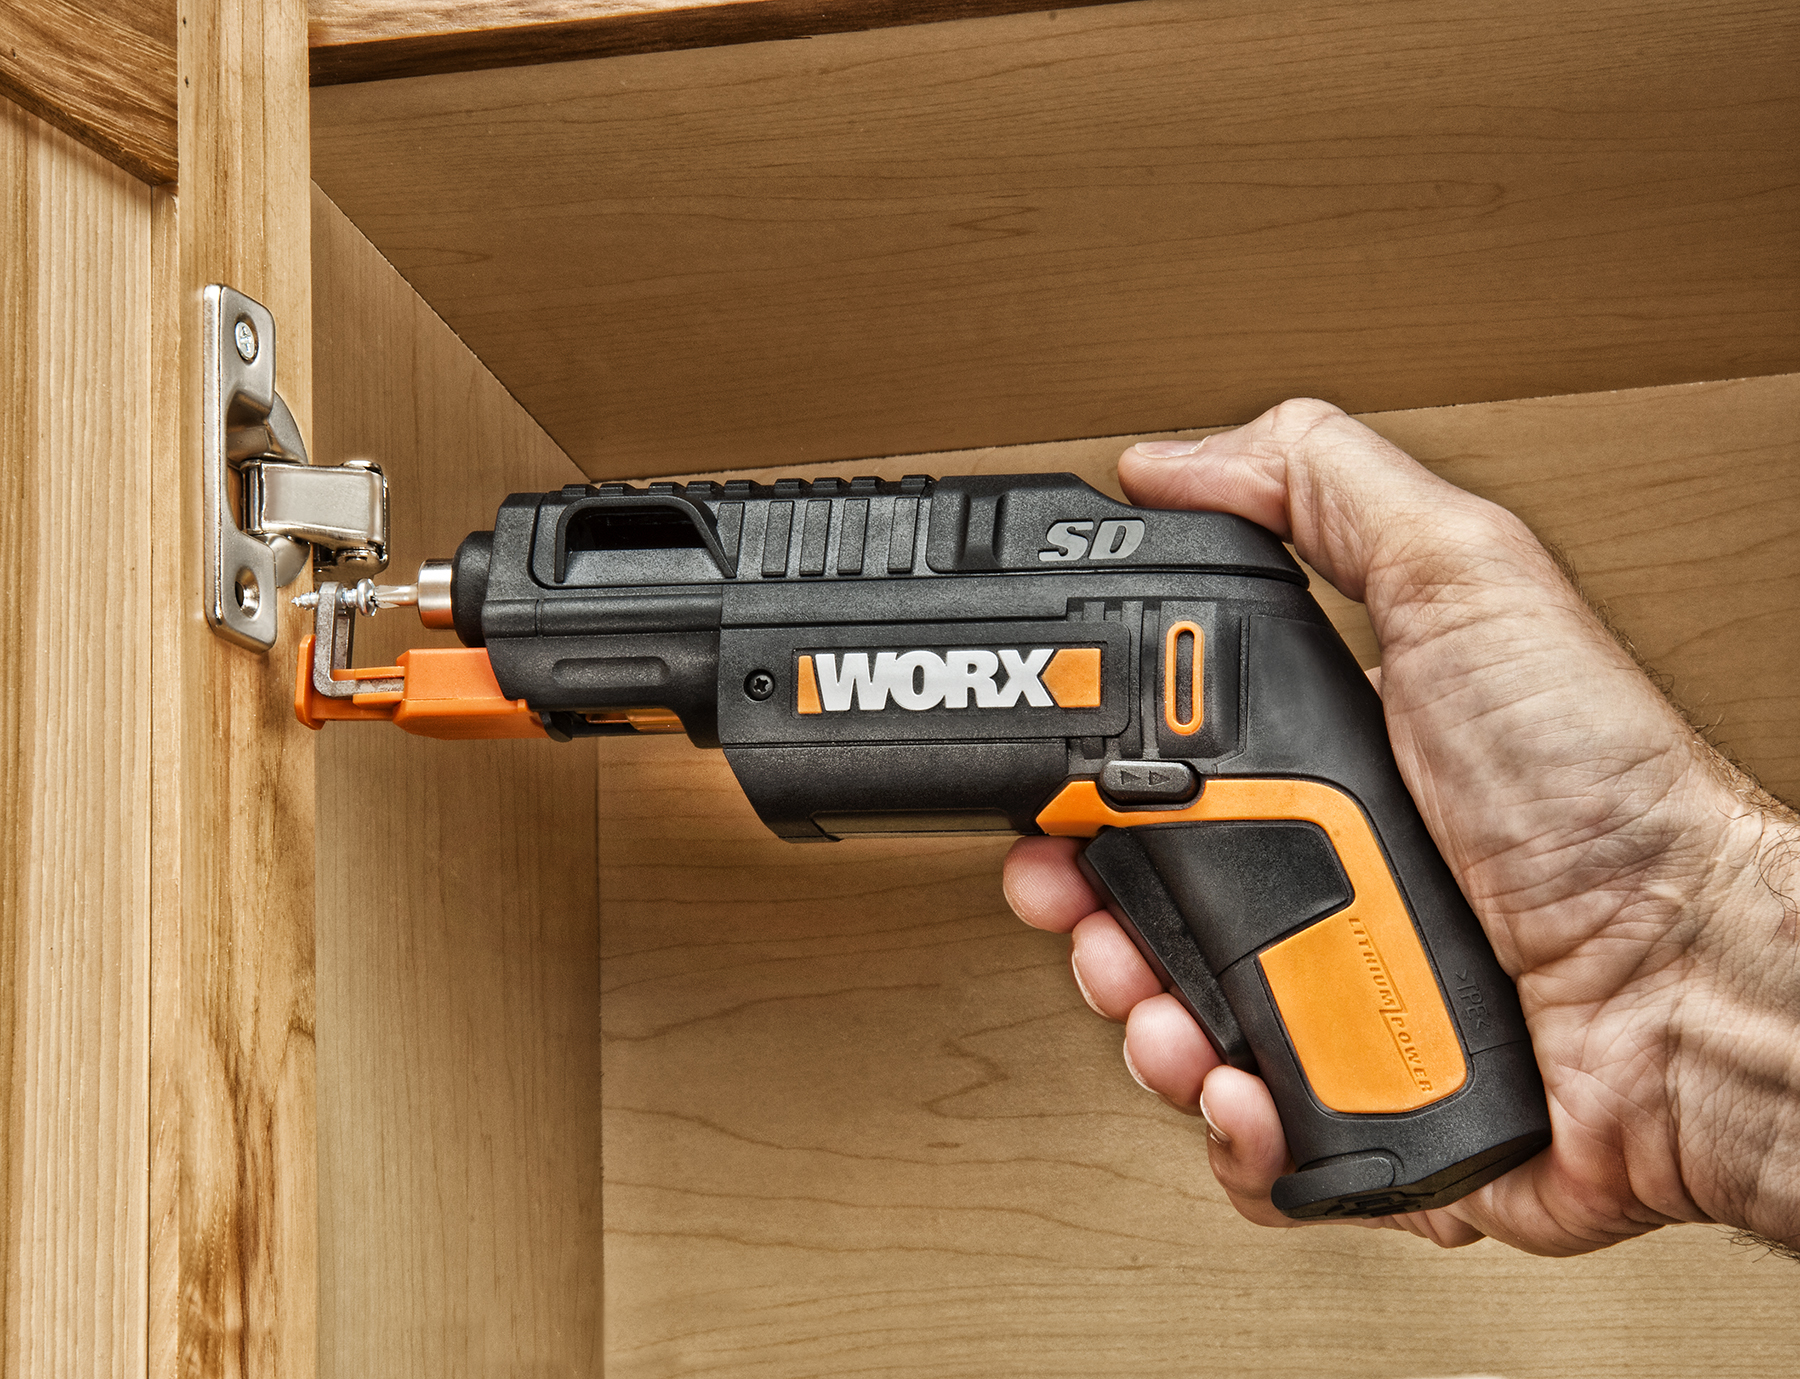 WORX SD SemiAutomatic Driver with Screw Holder helps fasten hinge.